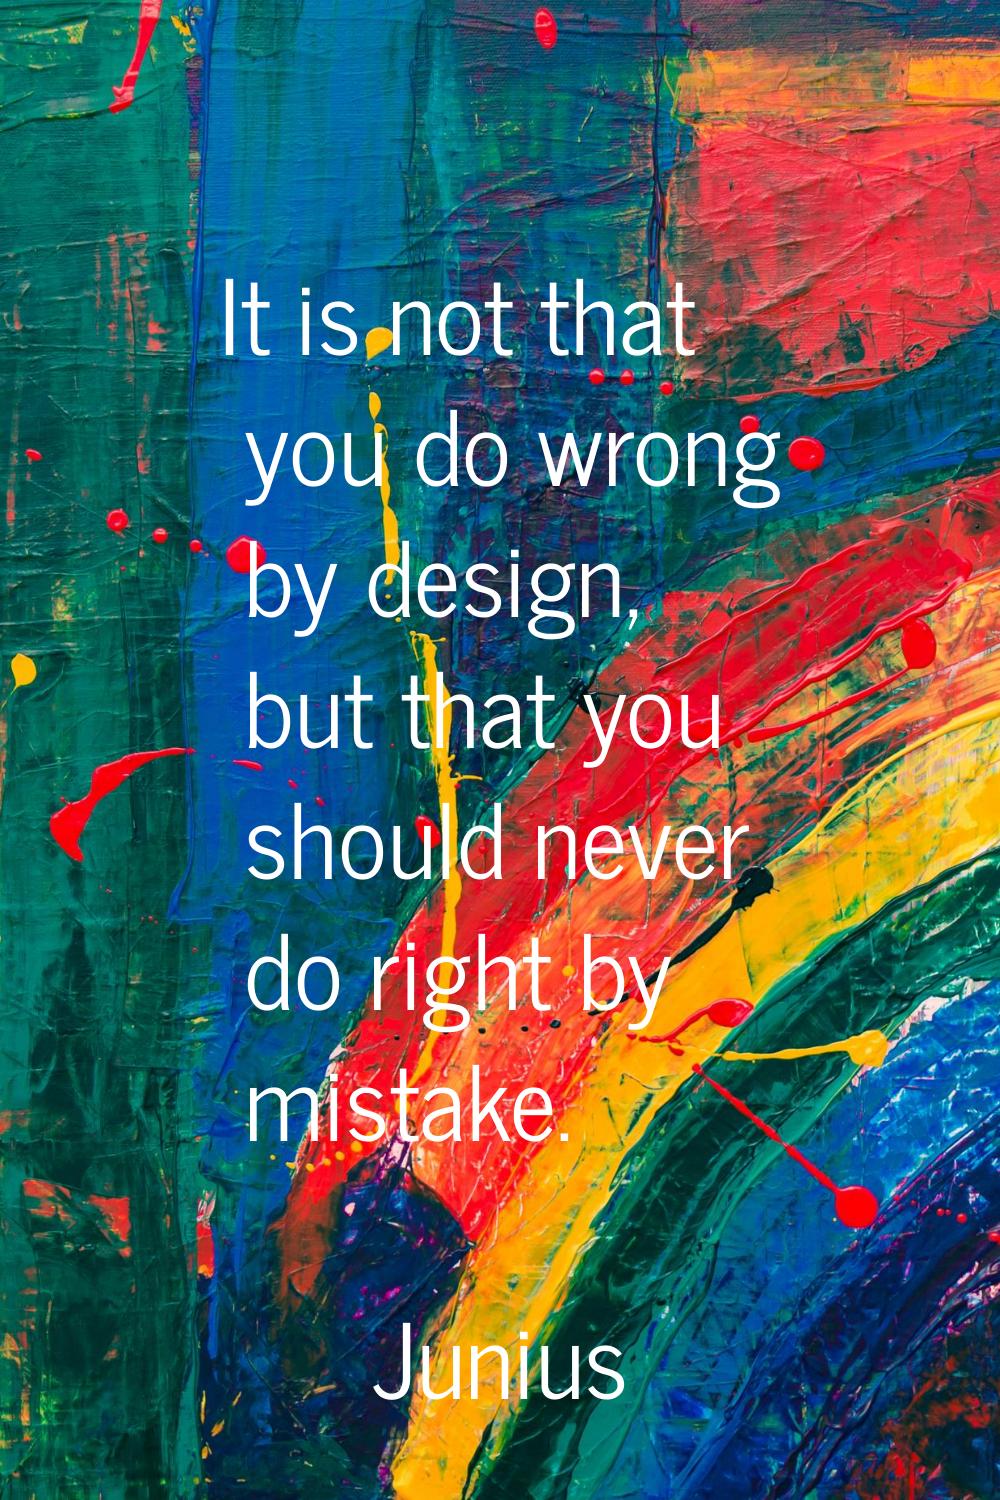 It is not that you do wrong by design, but that you should never do right by mistake.